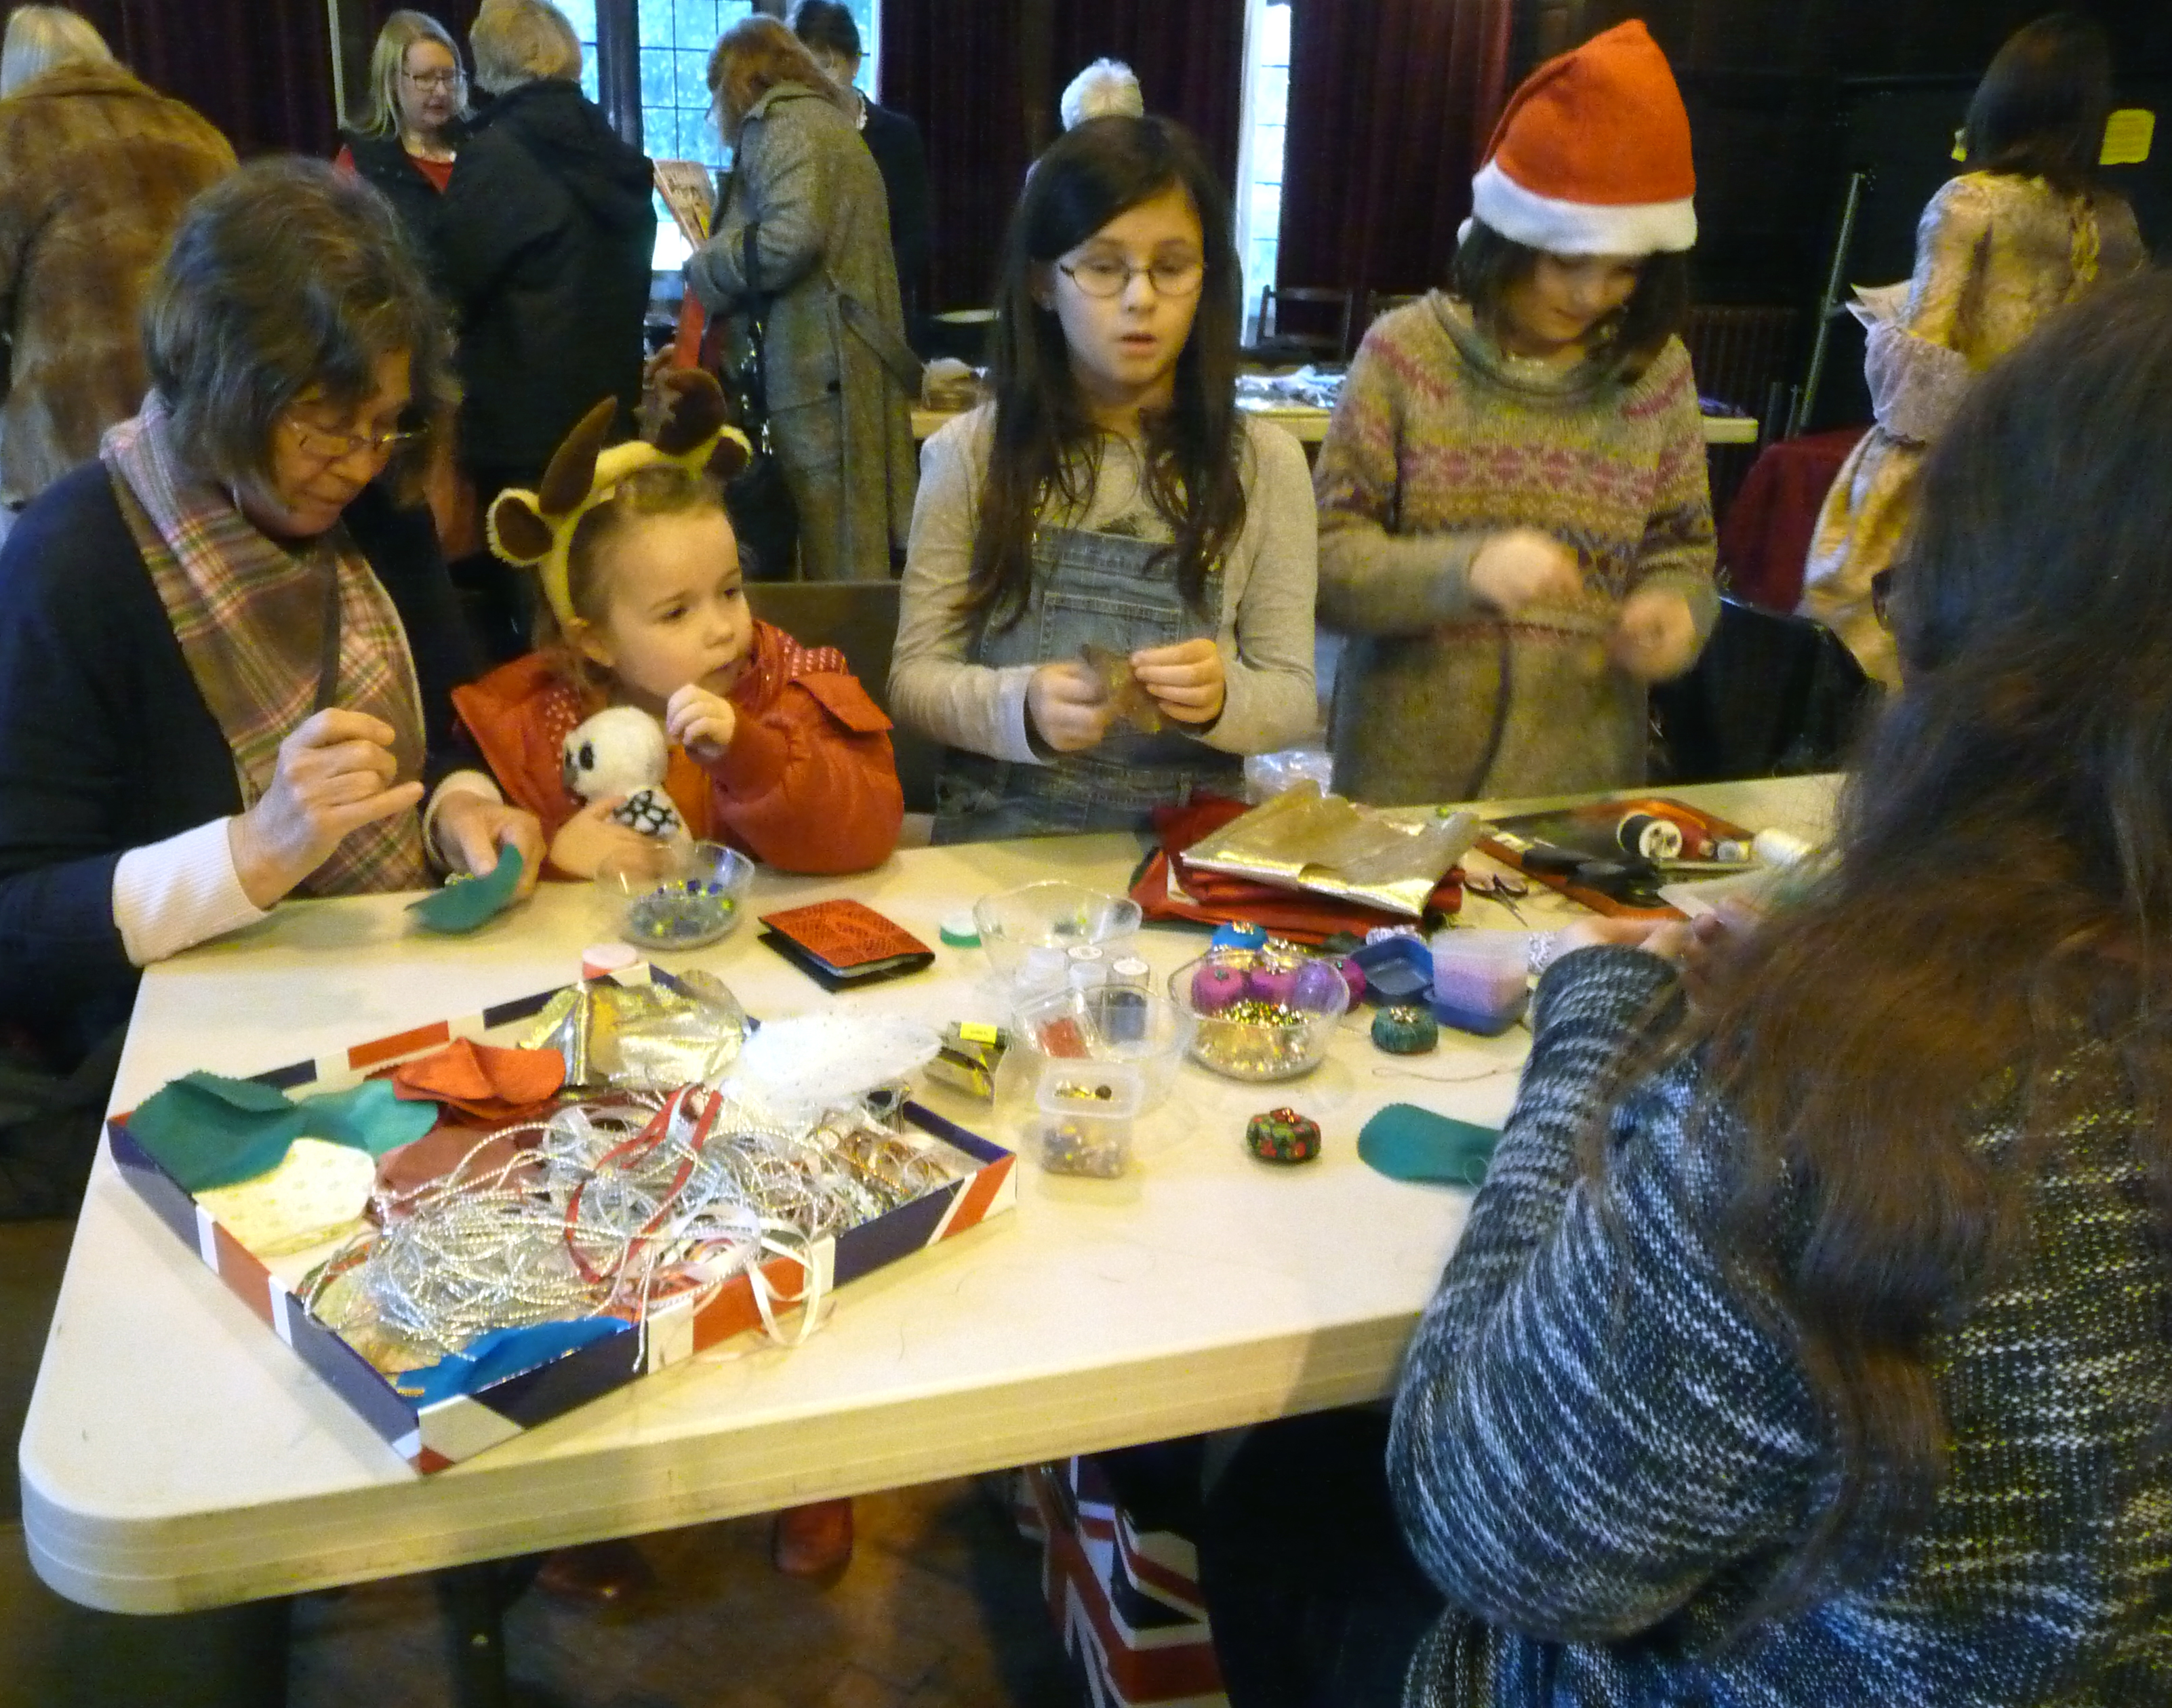 some of our YE members enjoying the Make & Take Christmas activity at MEG Christmas Party 2014